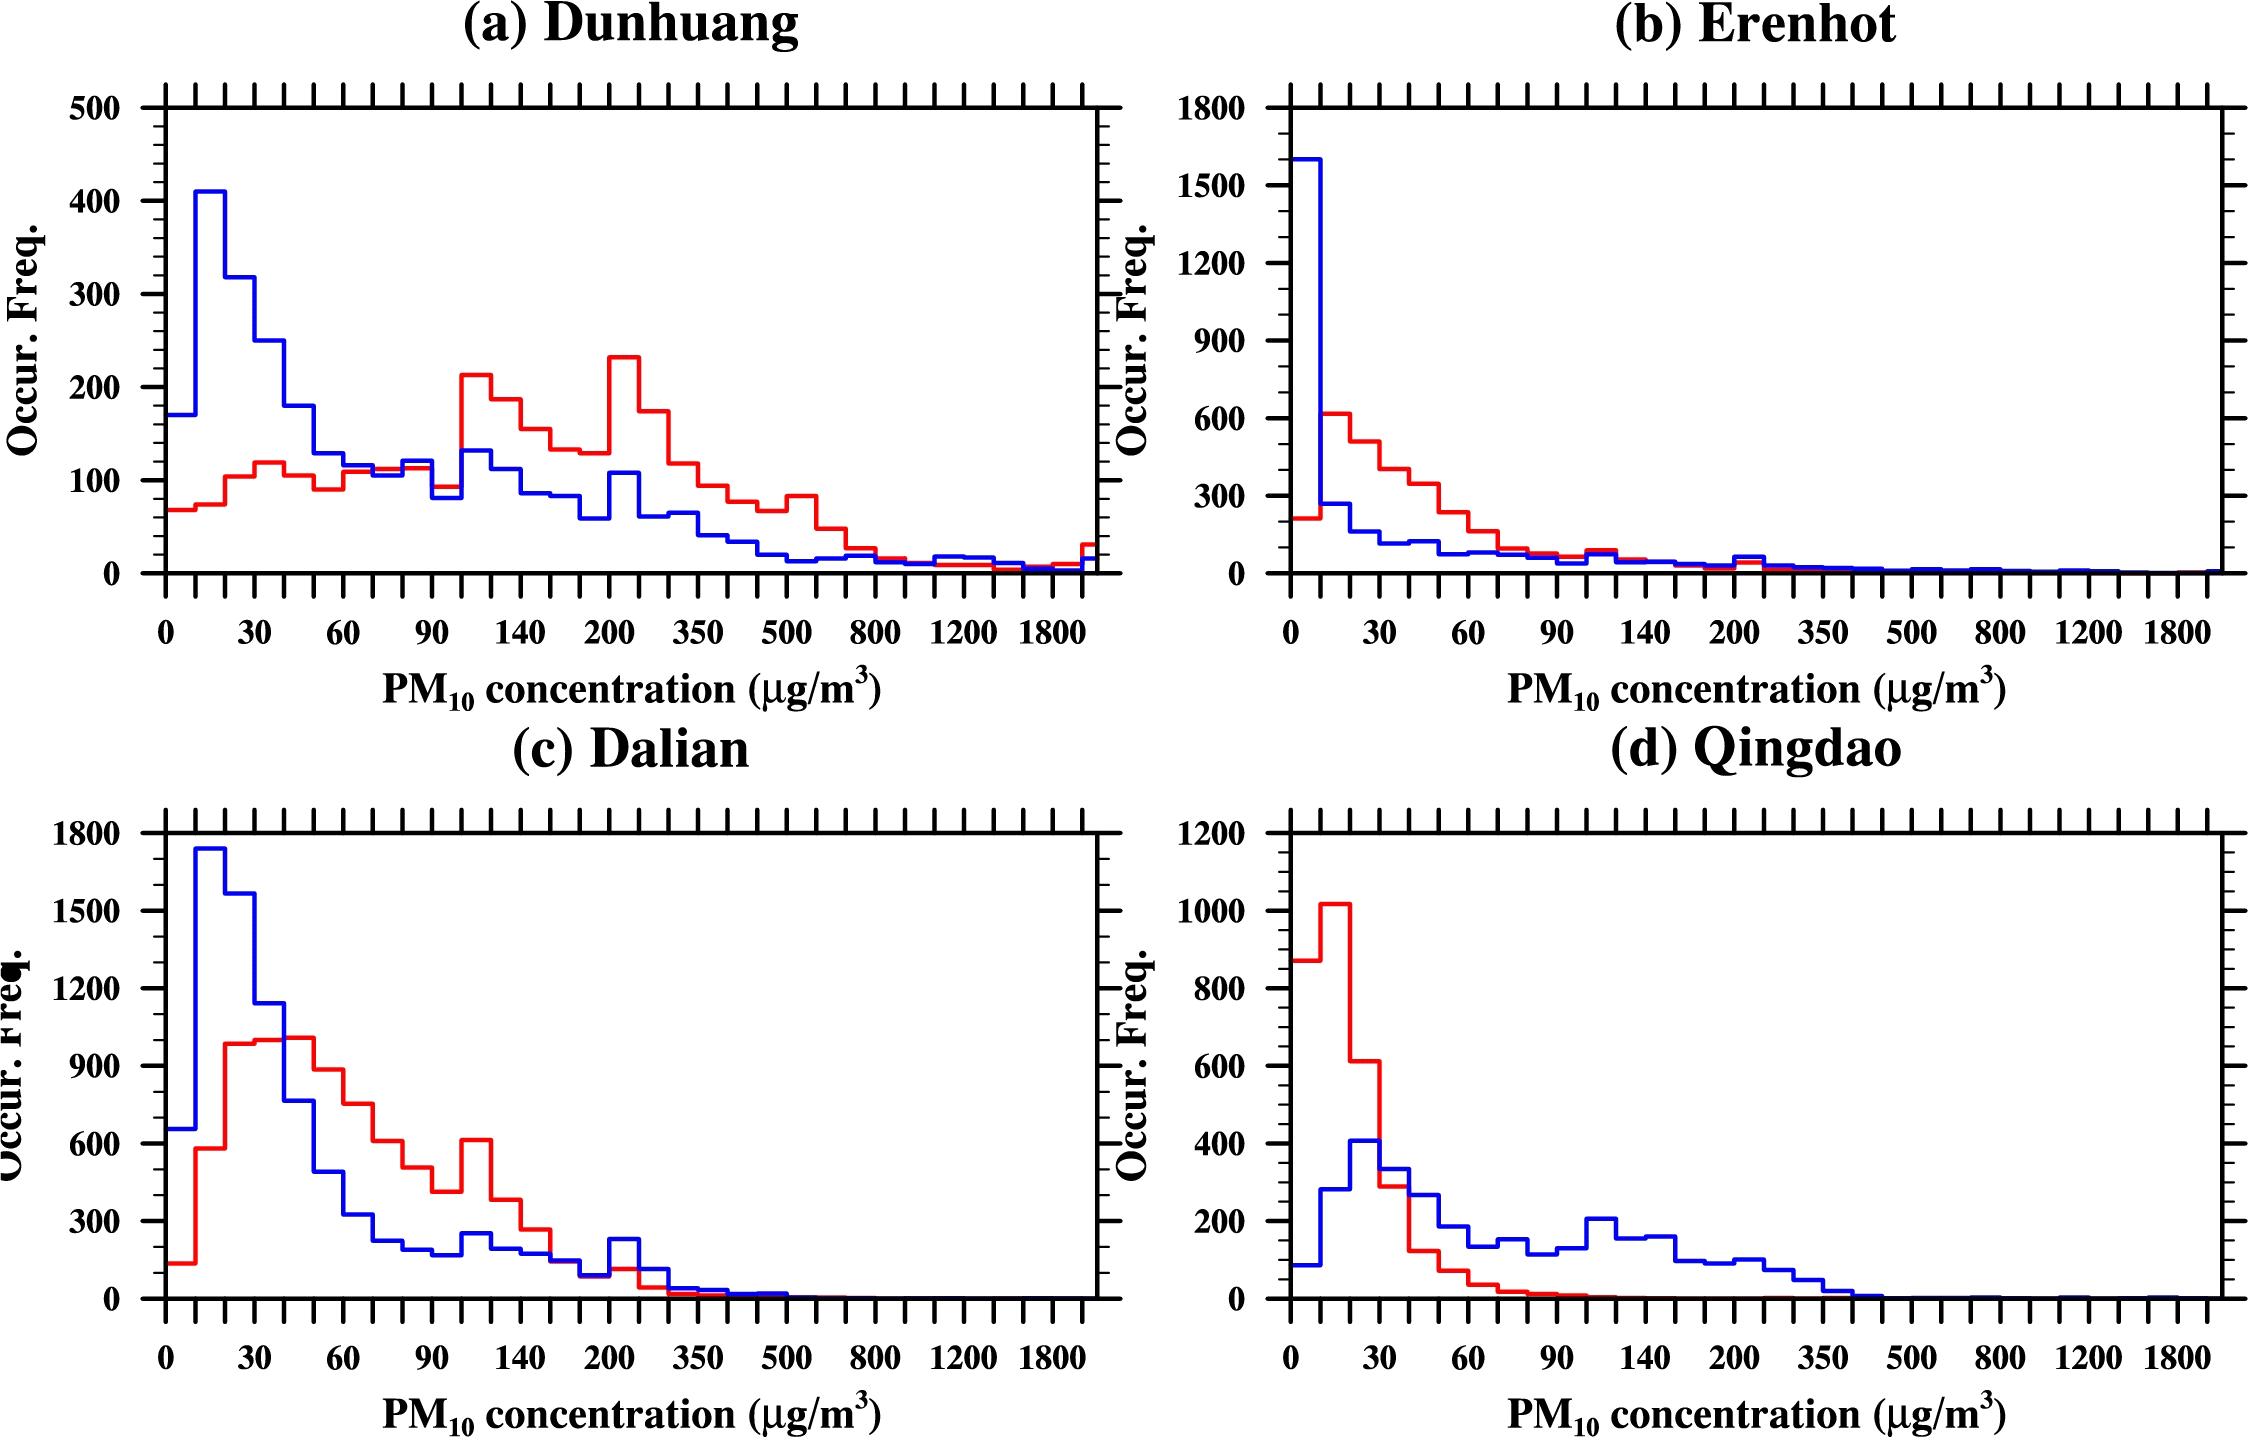 Fig. 3.2.5 Occurrence frequencies of modeled (blue line) and observed (red line) PM10 concentration at each bin at (a) Dunhuang, (b) Erenhot, (c) Dalian and (d) Qingdao in China